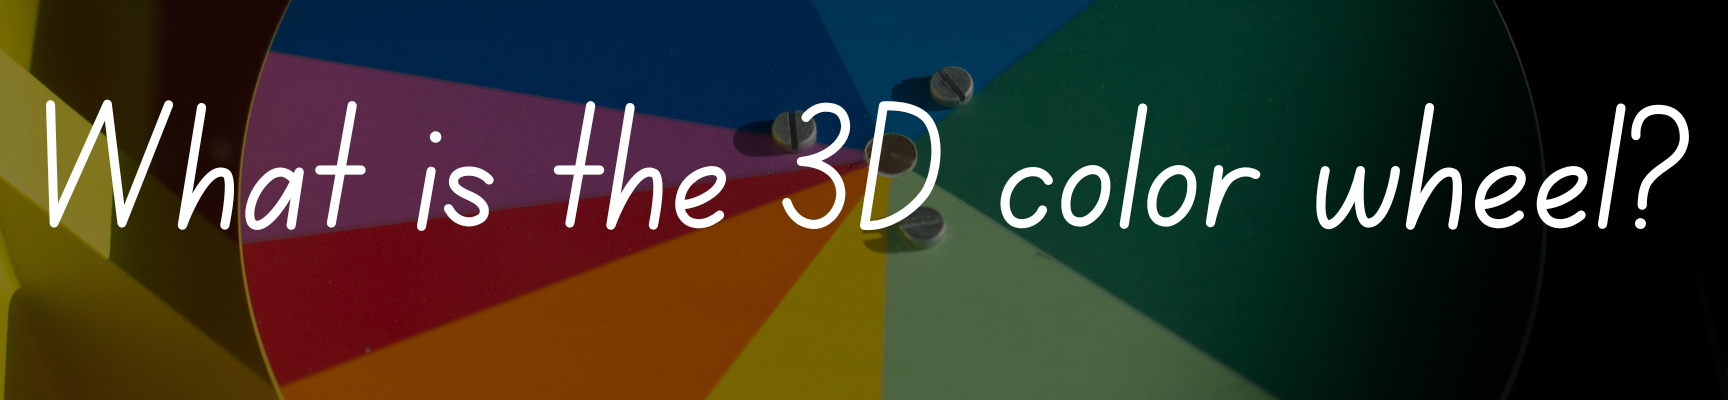 What is the 3D color wheel?